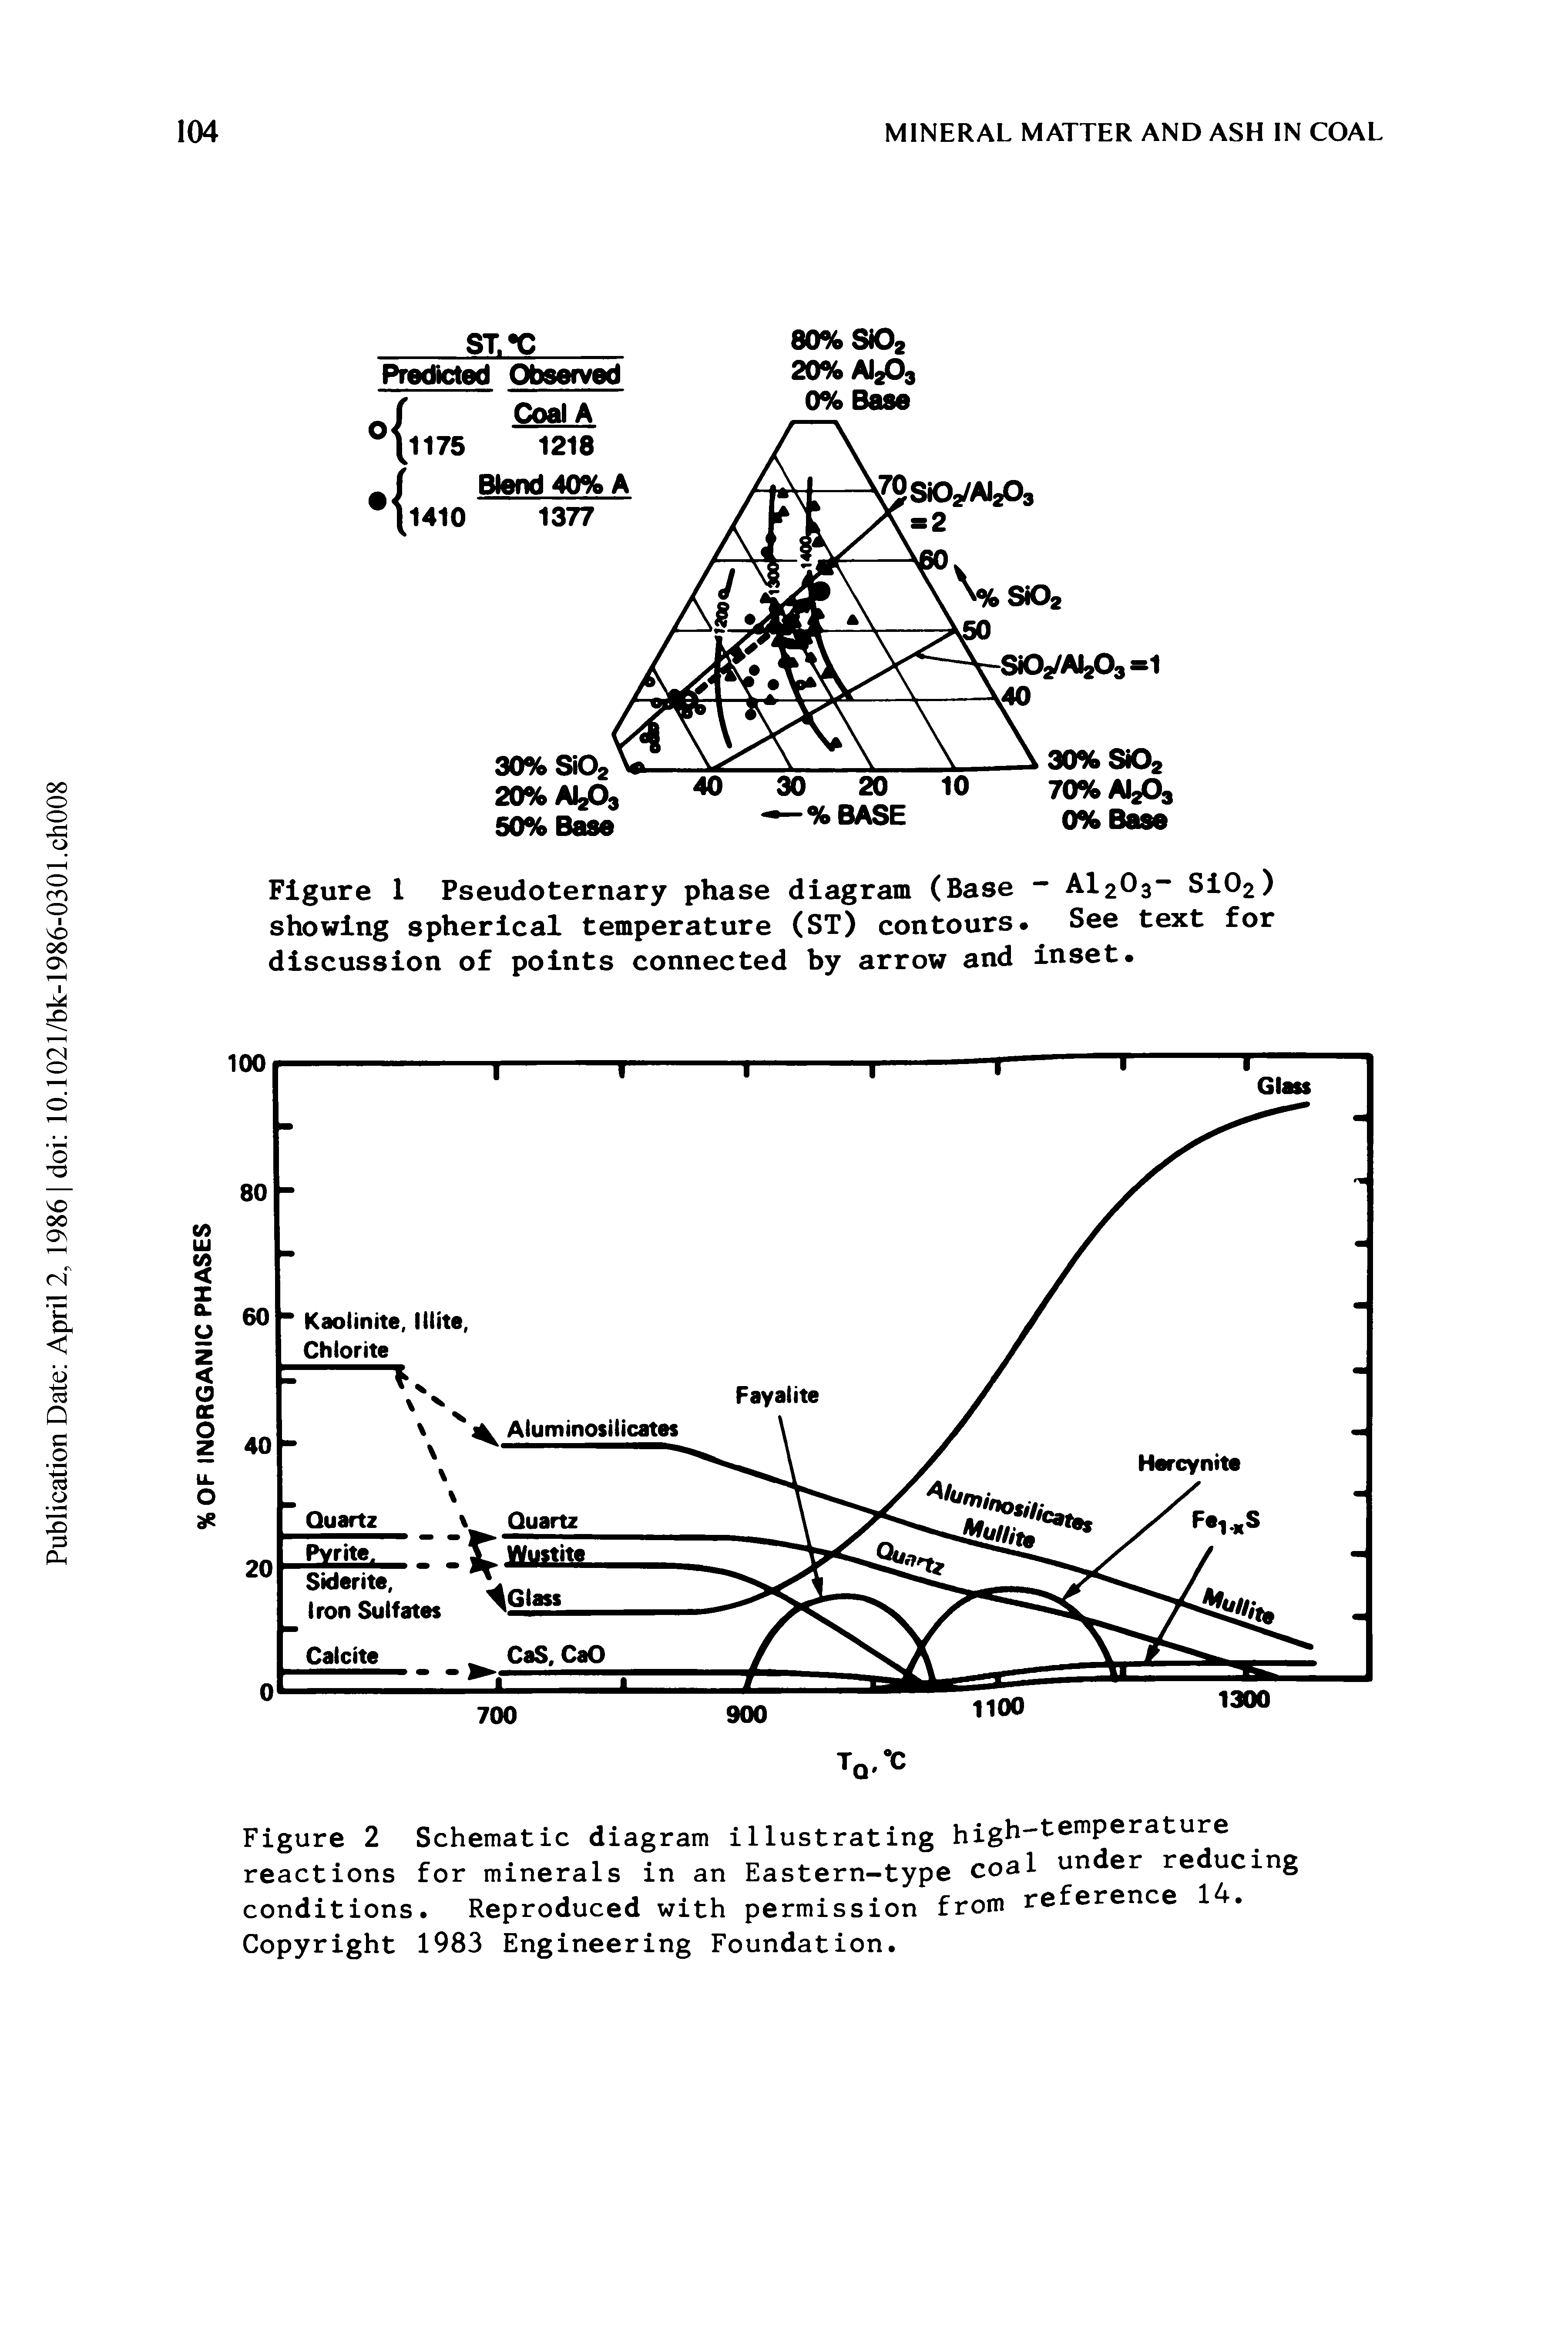 Figure 1 Pseudoternary phase diagram (Base - AI2O3- Si02) showing spherical temperature (ST) contours. See text for discussion of points connected by arrow and inset.